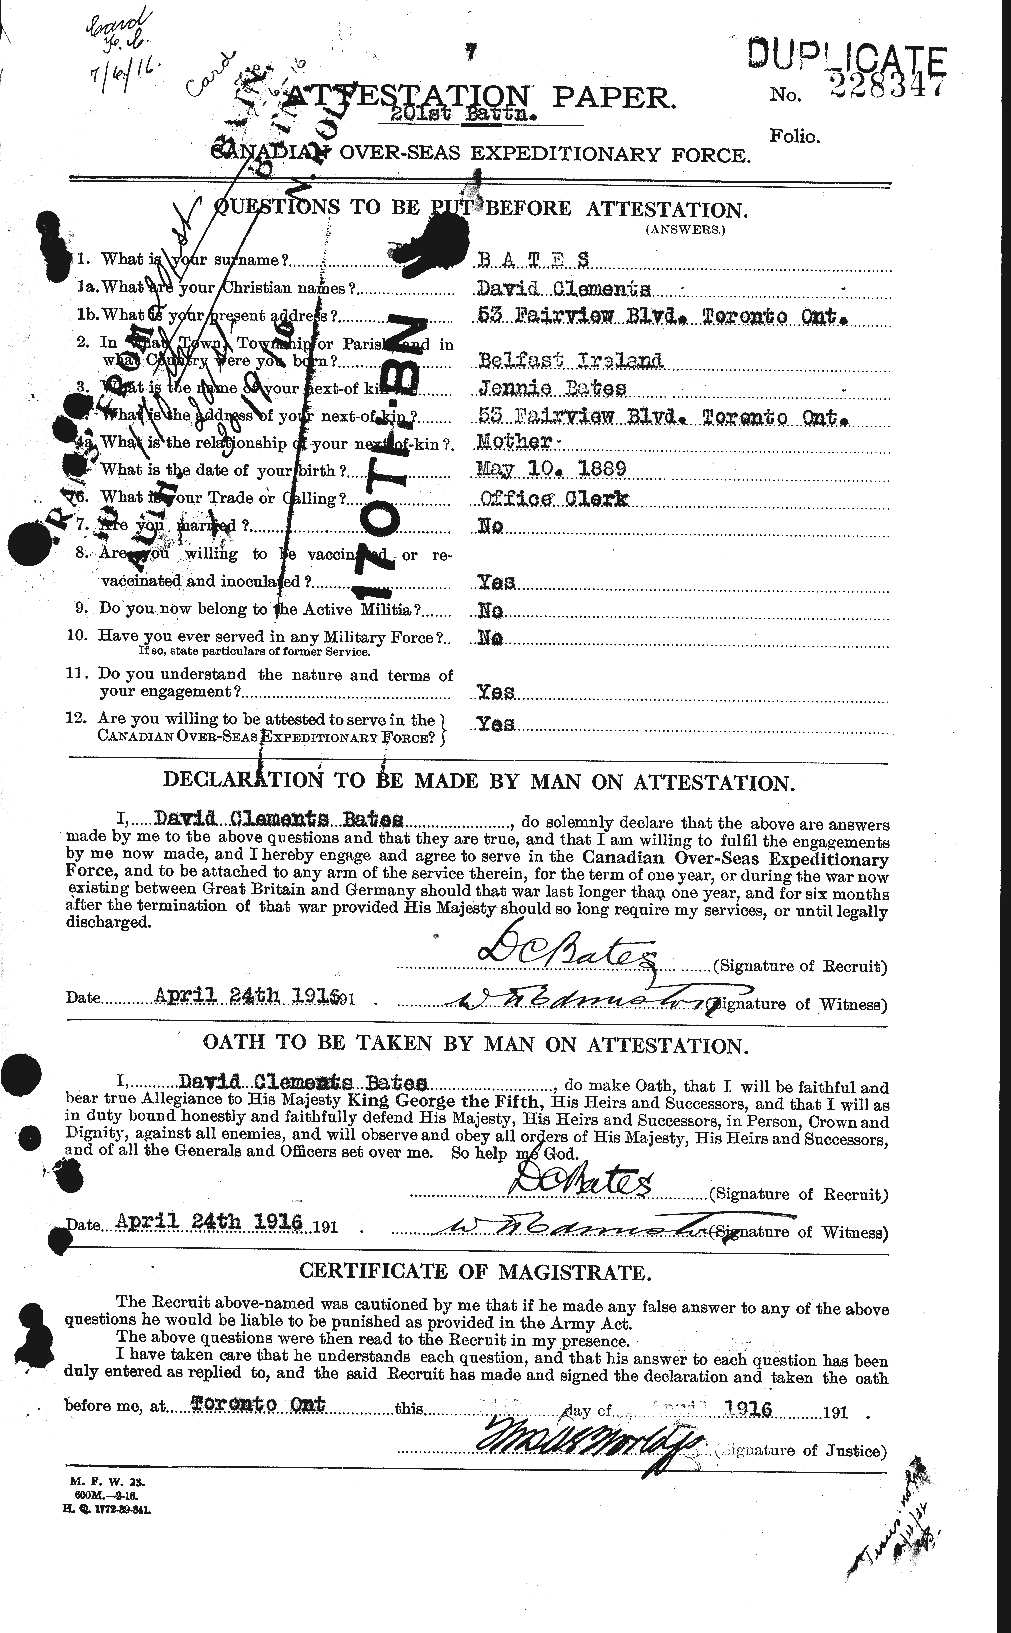 Personnel Records of the First World War - CEF 221990a